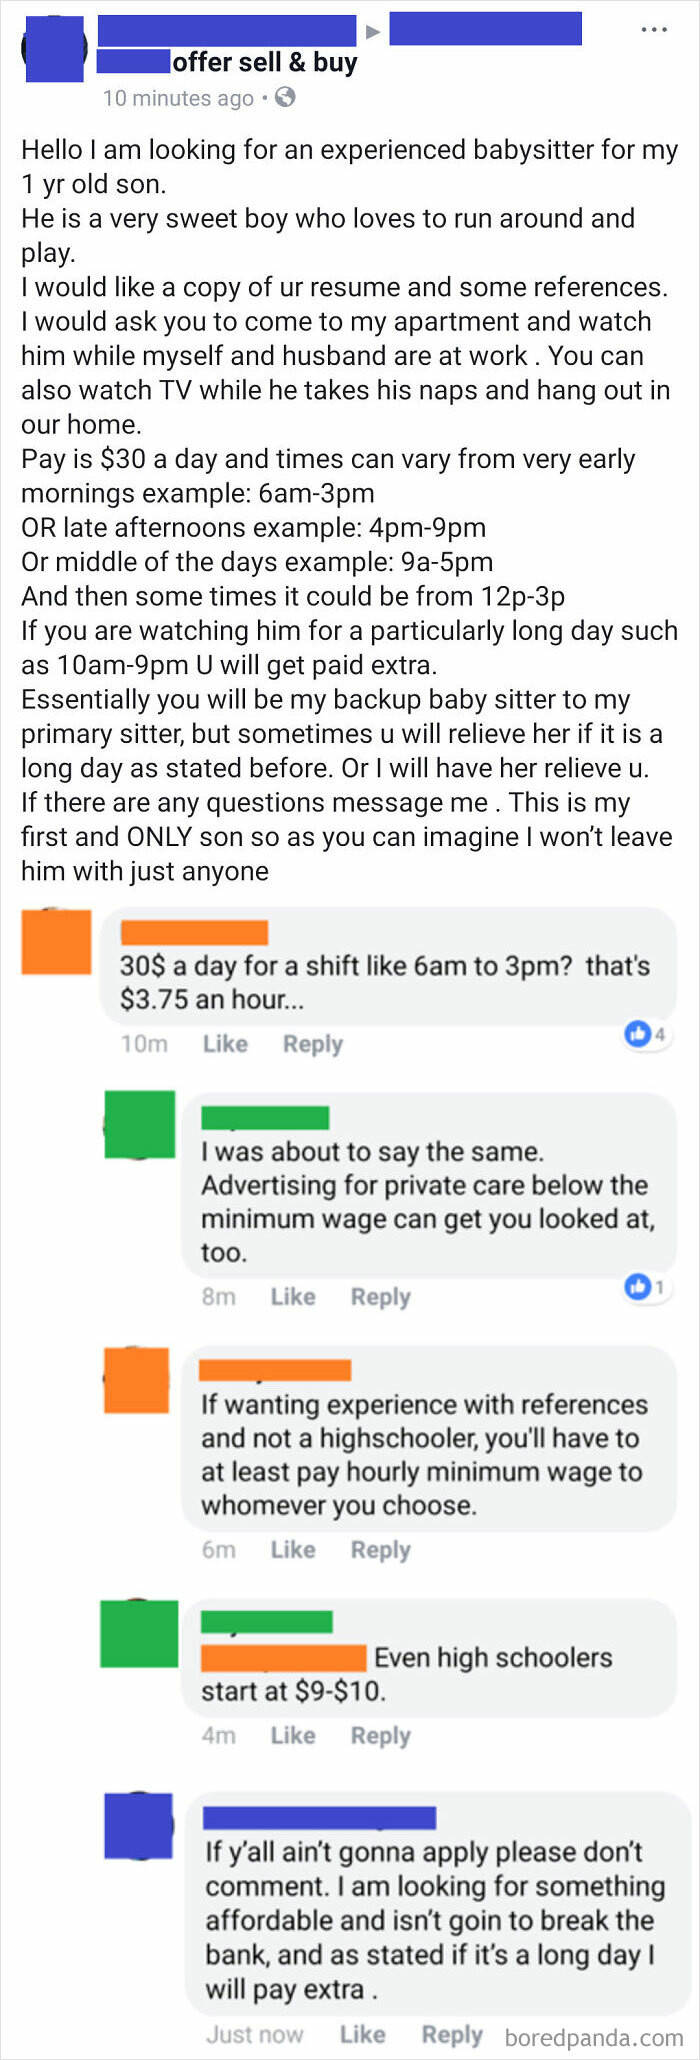 10. Experienced babysitter needed at $3/hr.